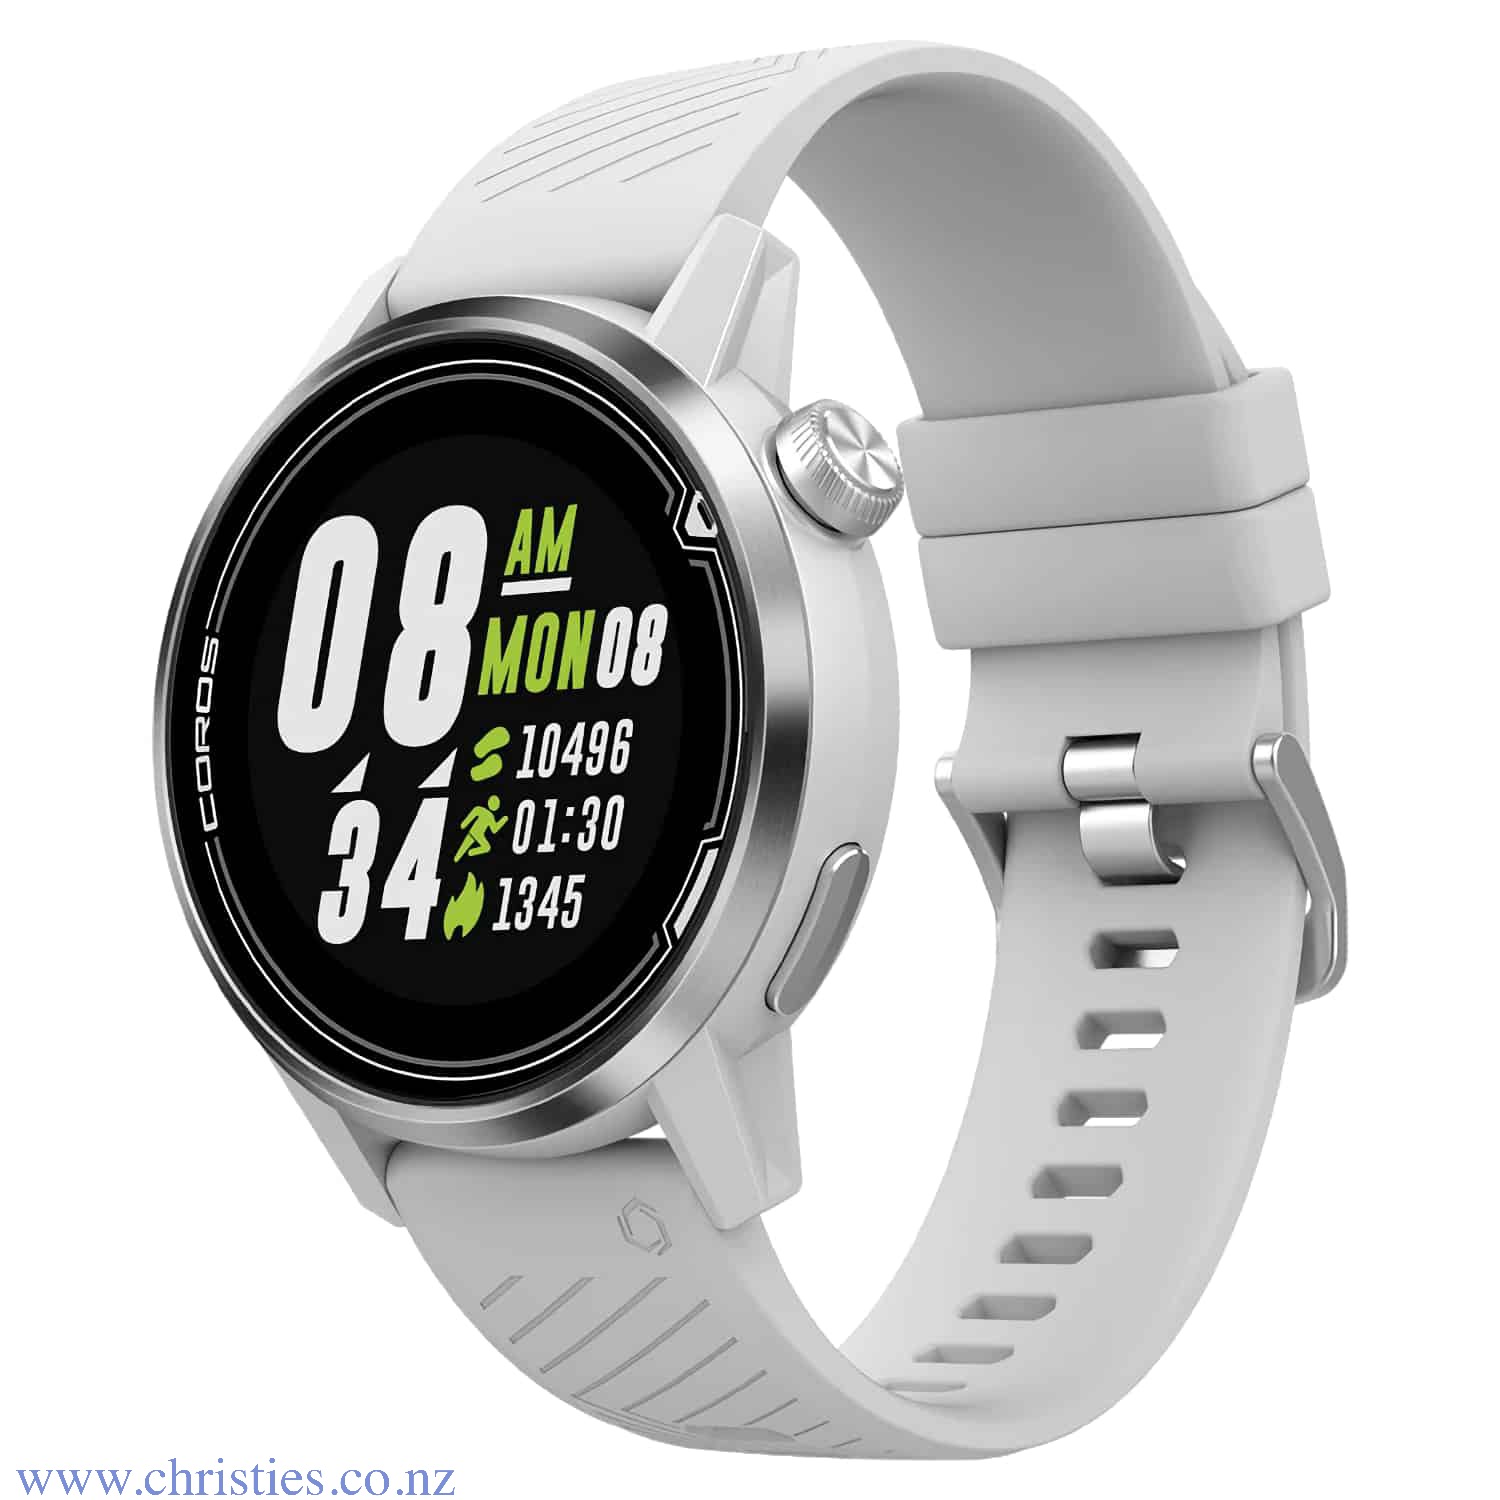 Coros Apex Premium 46mm Pearl White Multisports Watch. Its easy to run daily, but how far should I run? How fast? Recovery makes me stronger, how long should I rest between two runs? How can I measure my overall fitness level improvement? APEX with COROS 